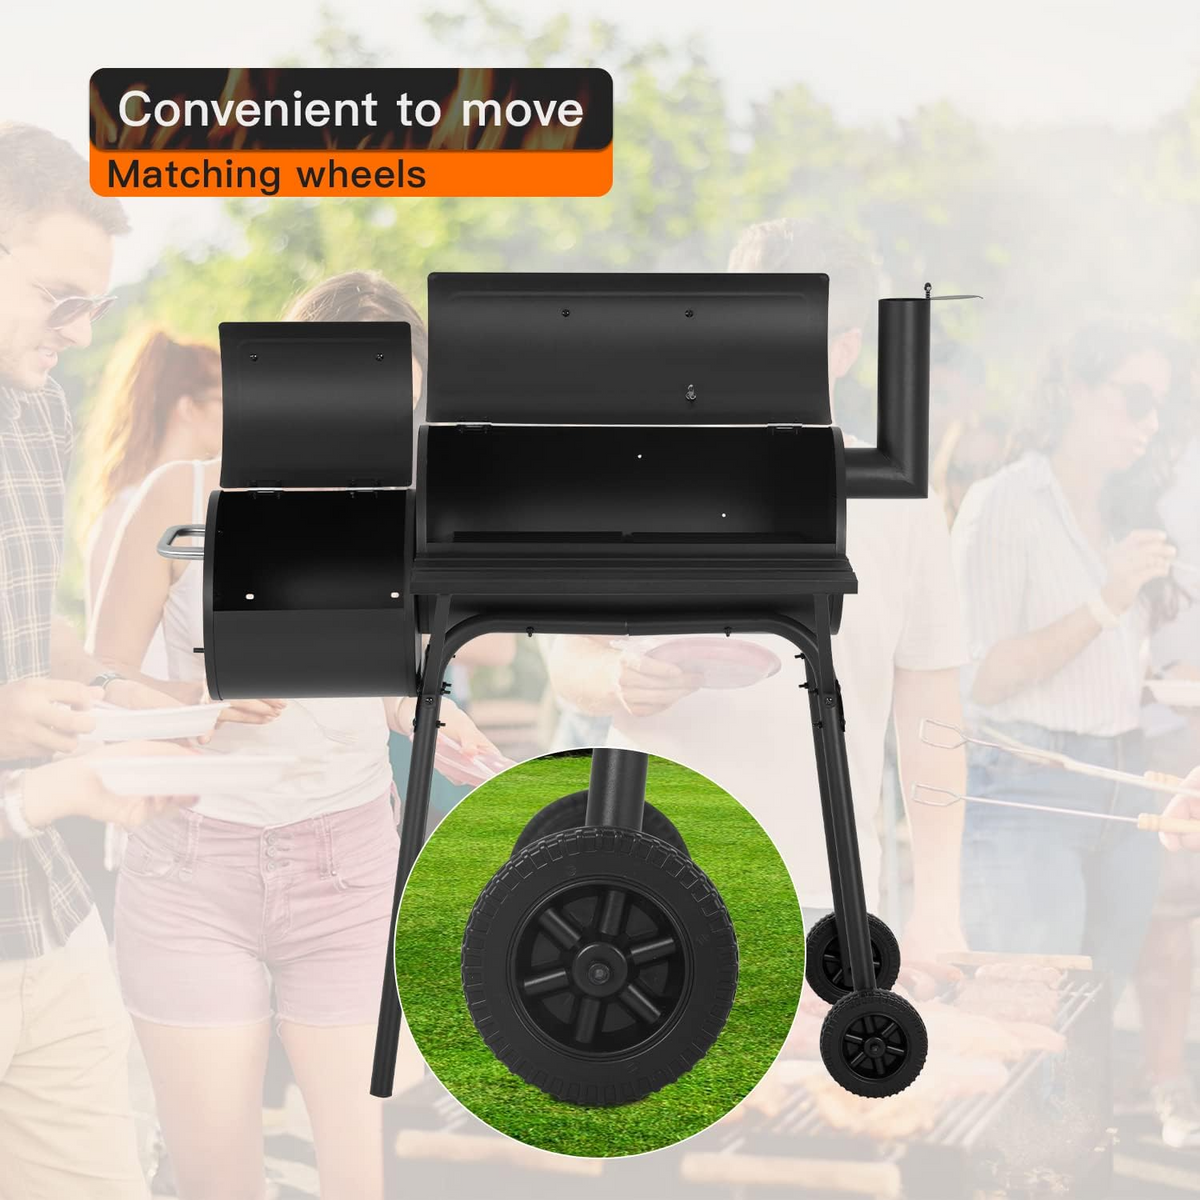 43-inch Charcoal Outdoor BBQ Grill - Portable Camping Grill for 6-10 People, Offset Smoker, Braised Roast, Patio and Backyard Picnic Grill - Barbecue Whizz...Watch My Smoke!